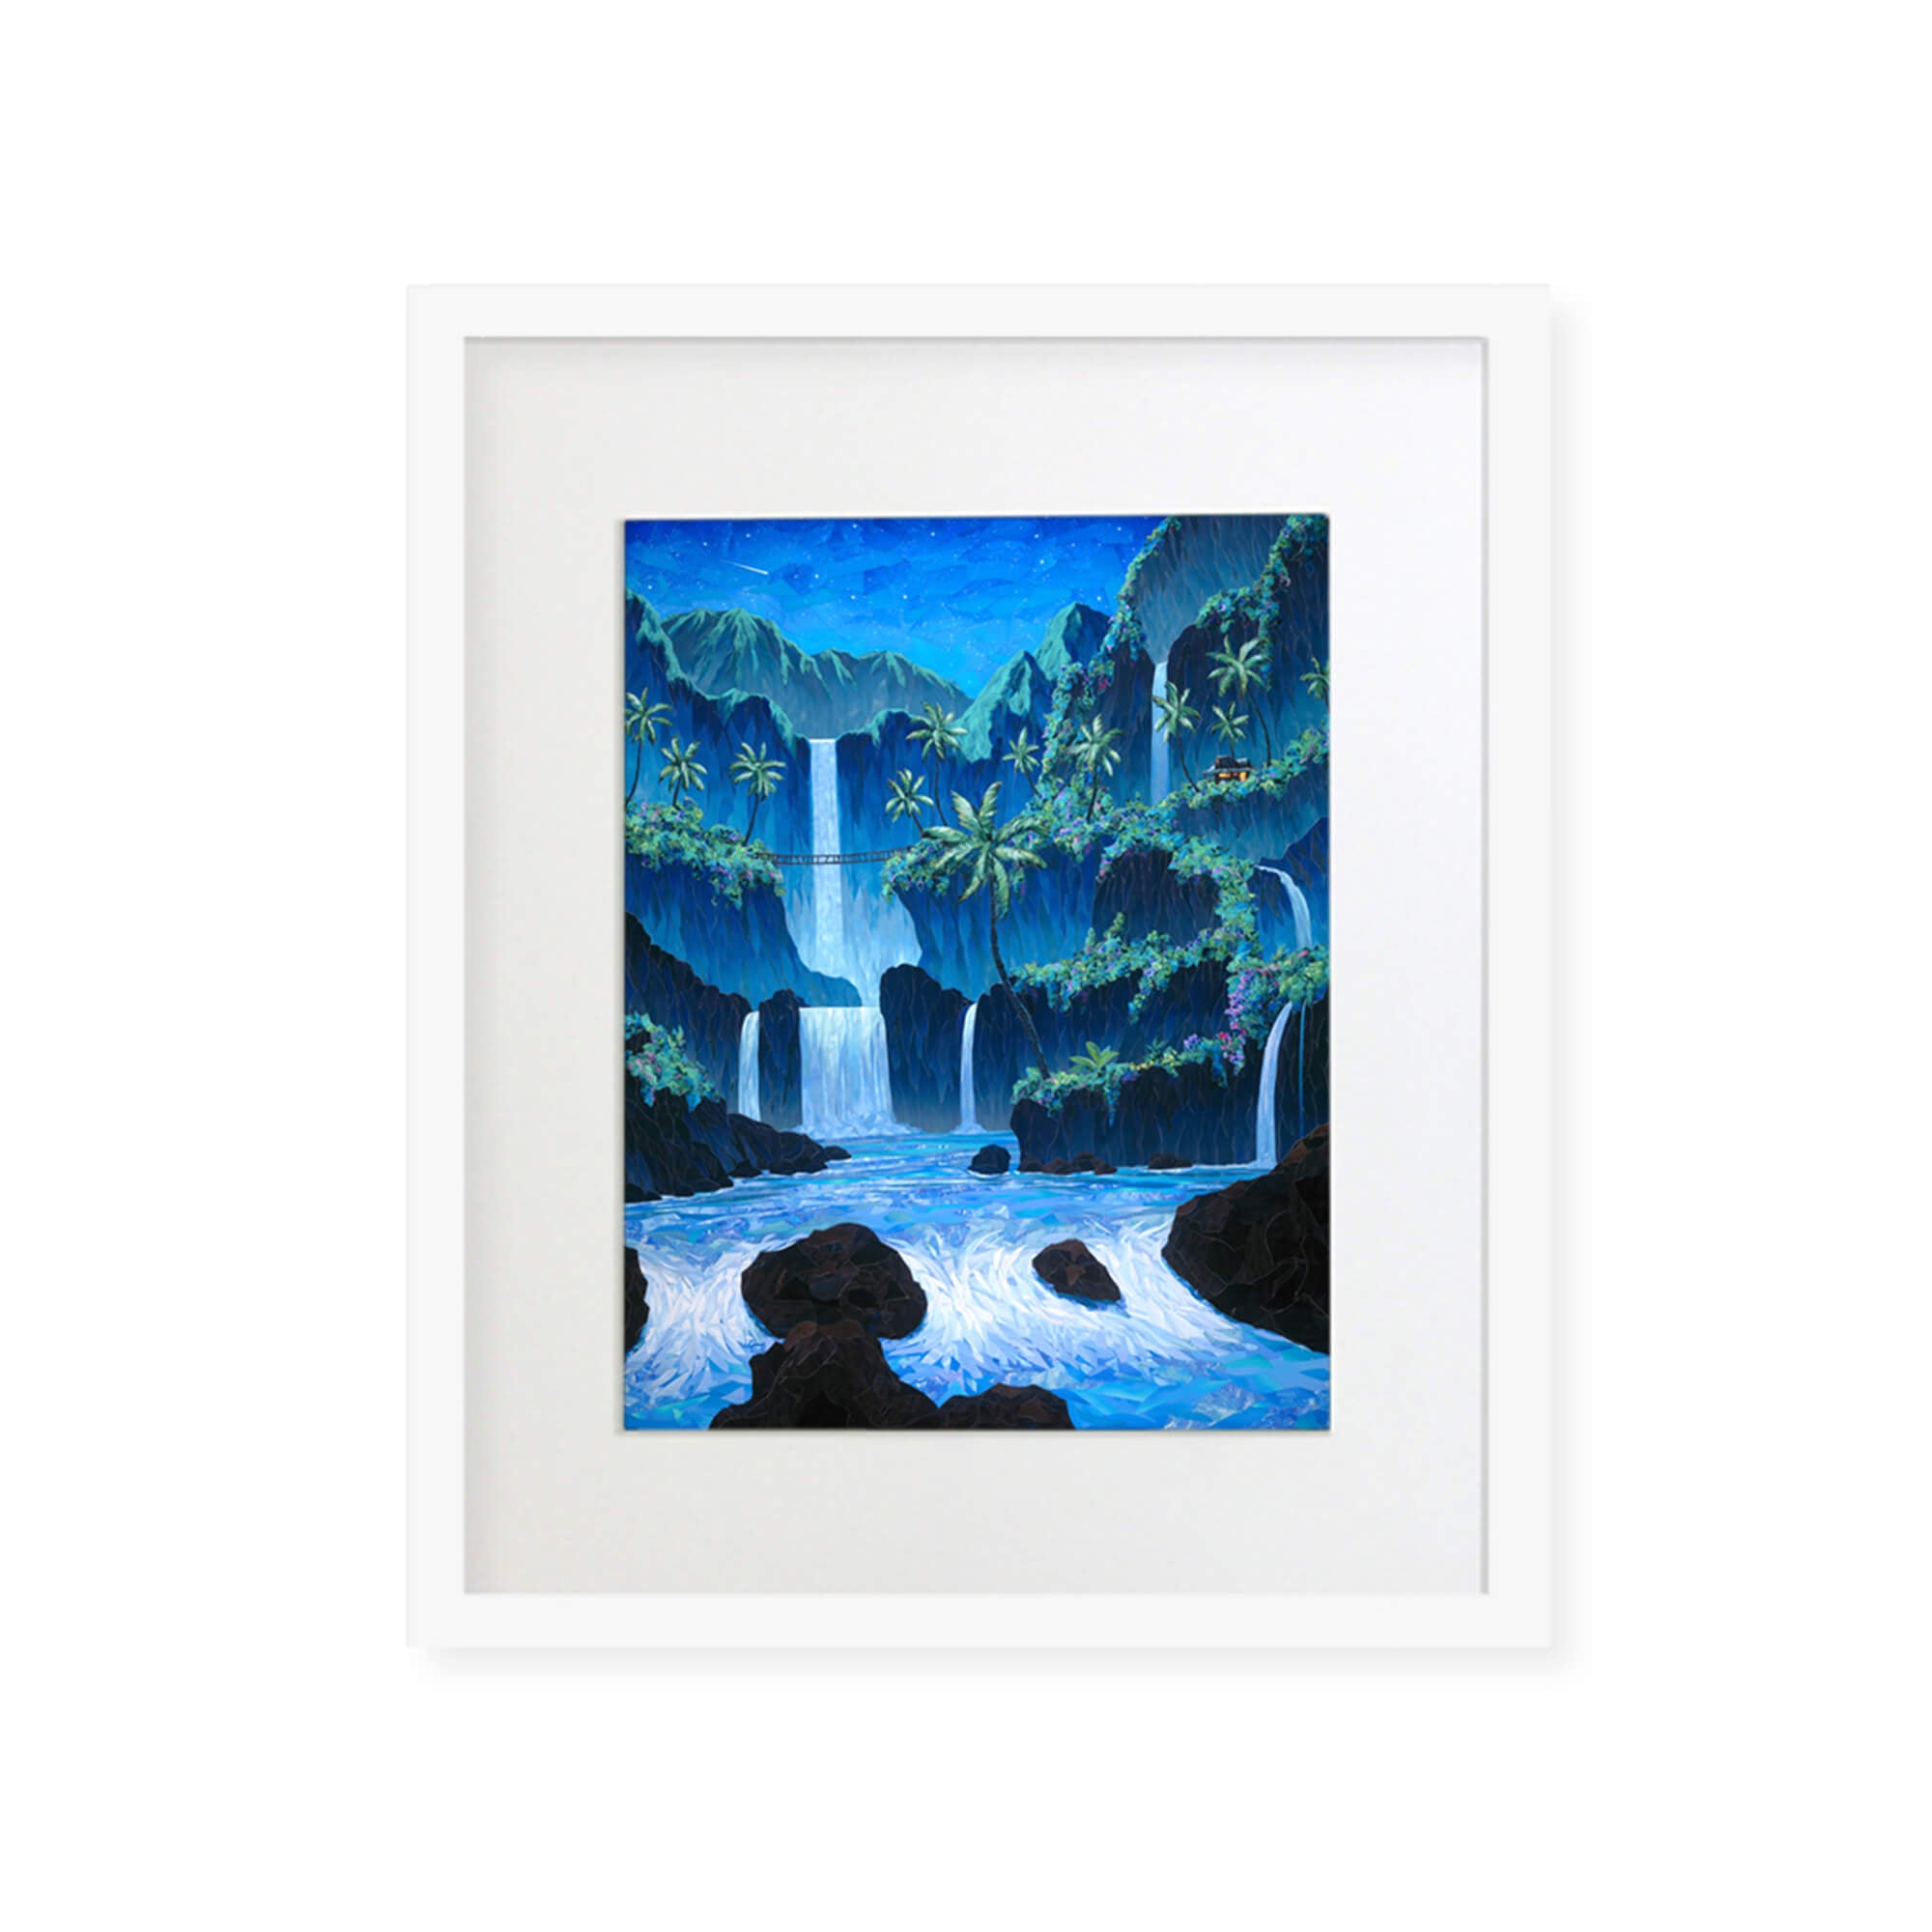 A framed matted art print featuring a collage of a dreamy tropical paradise with several waterfalls, surrounded by Mountains and colorful tropical flowers by Hawaii artist Patrick Parker